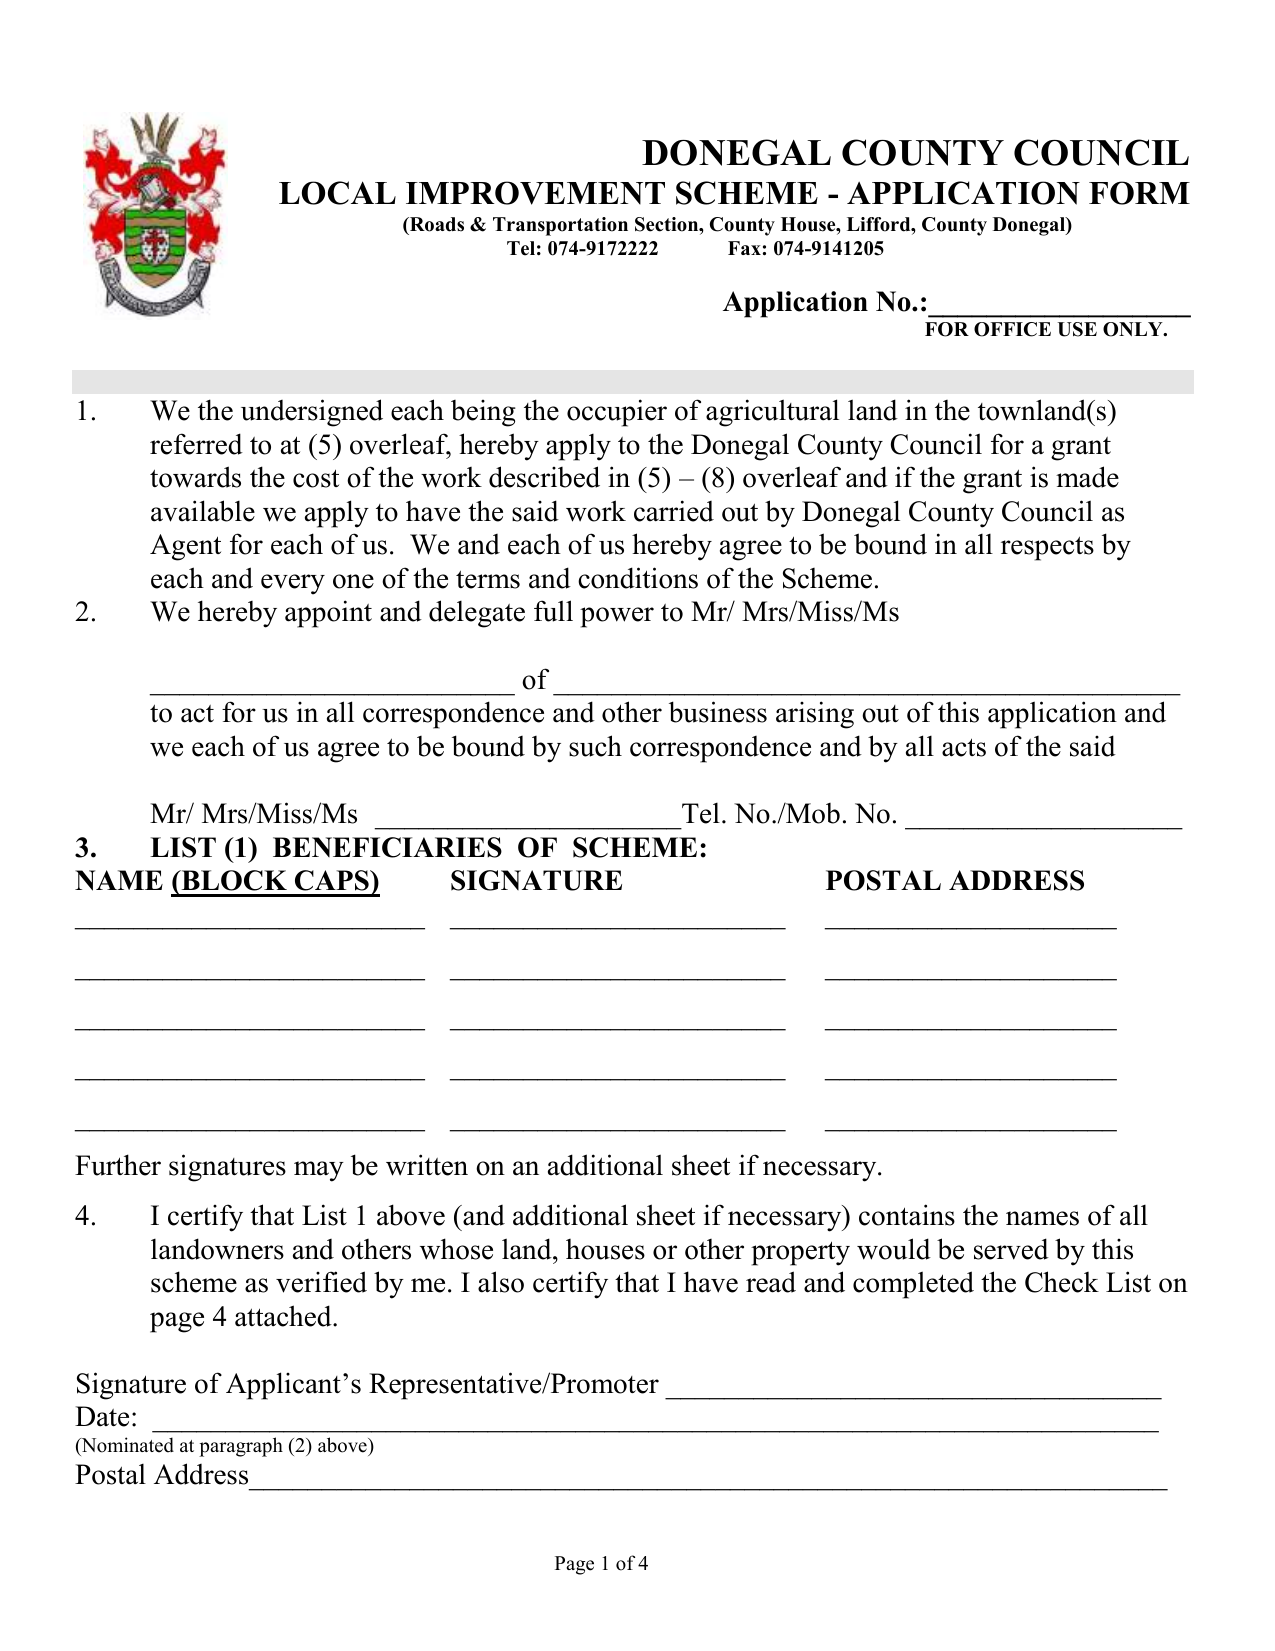 Application Form LIS Donegal County Council